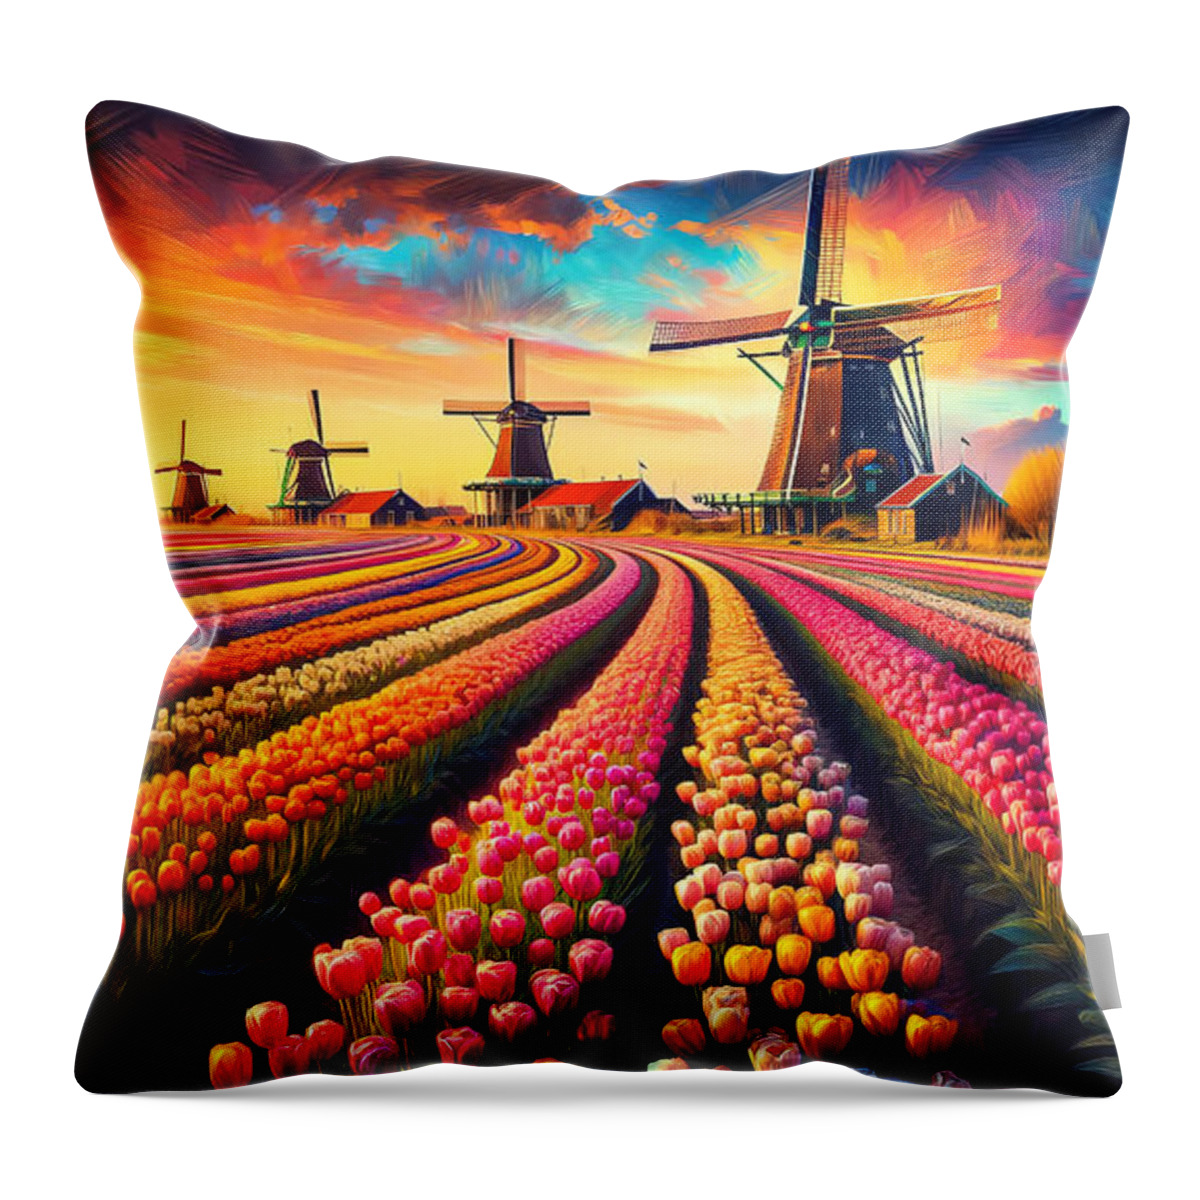 Dutch Throw Pillow featuring the painting A Dutch tulip field, with windmills and a vibrant sunset sky. by Jeff Creation